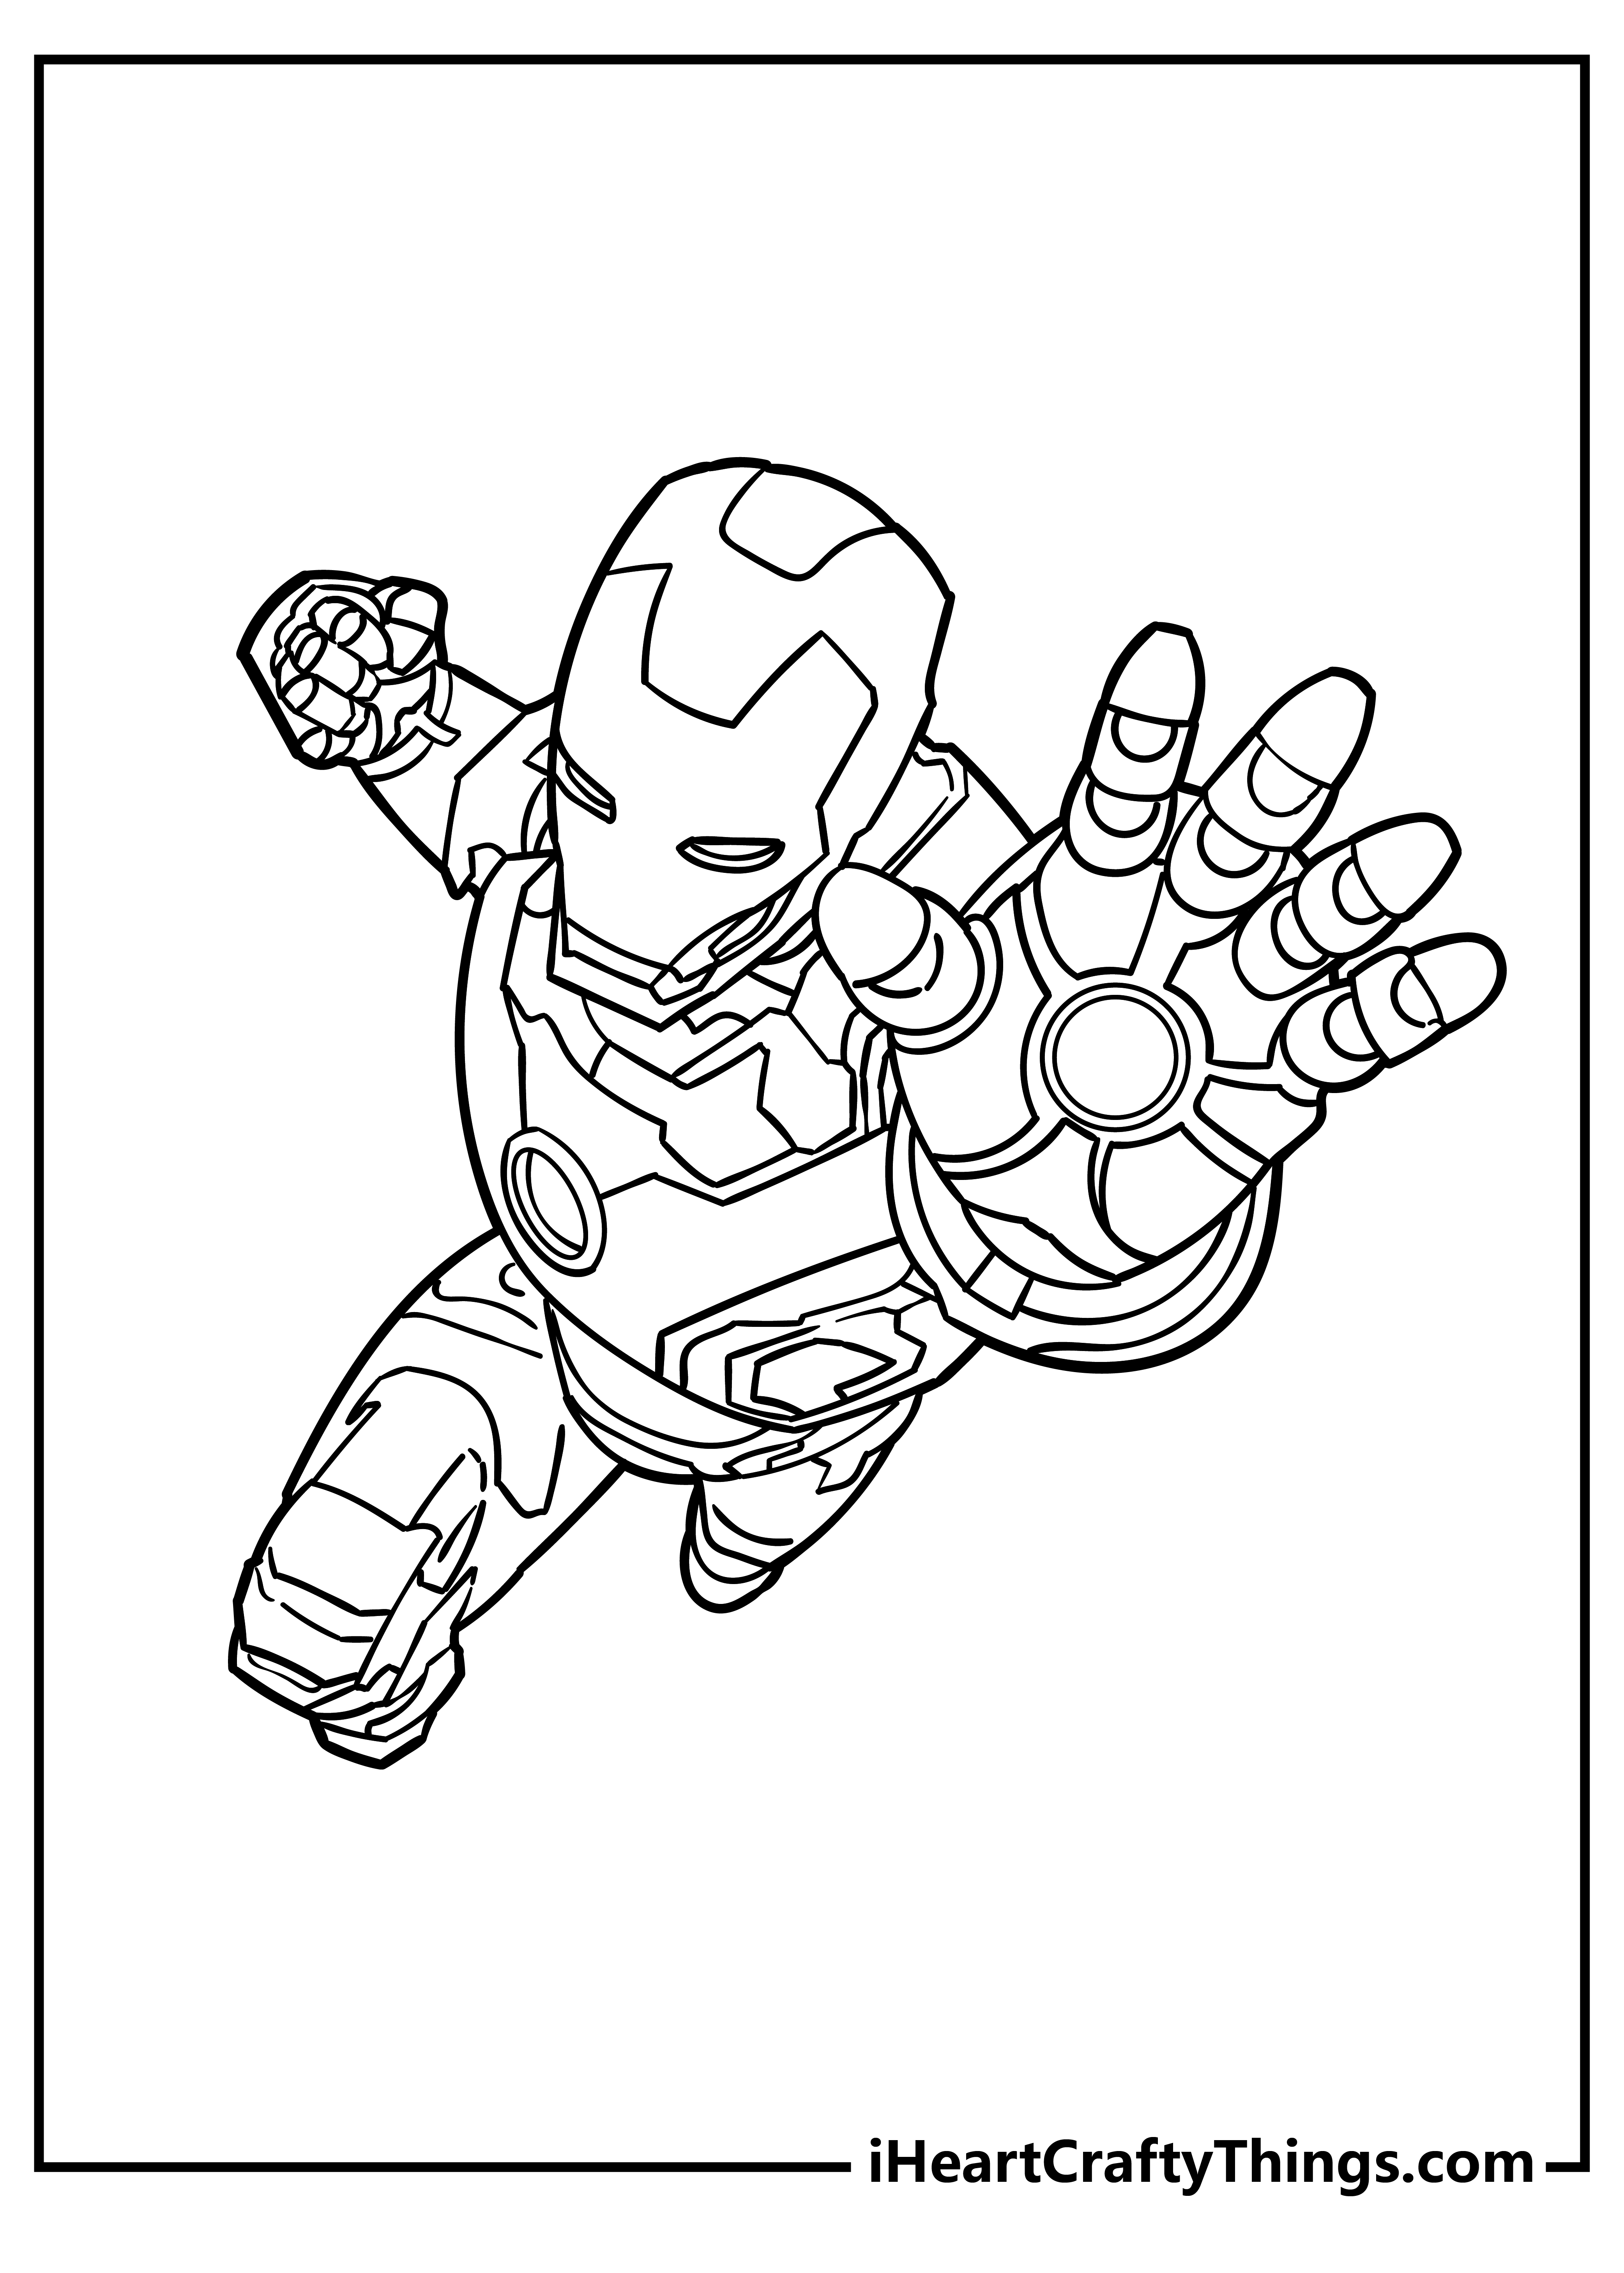 Avengers Coloring Pages for kids free download